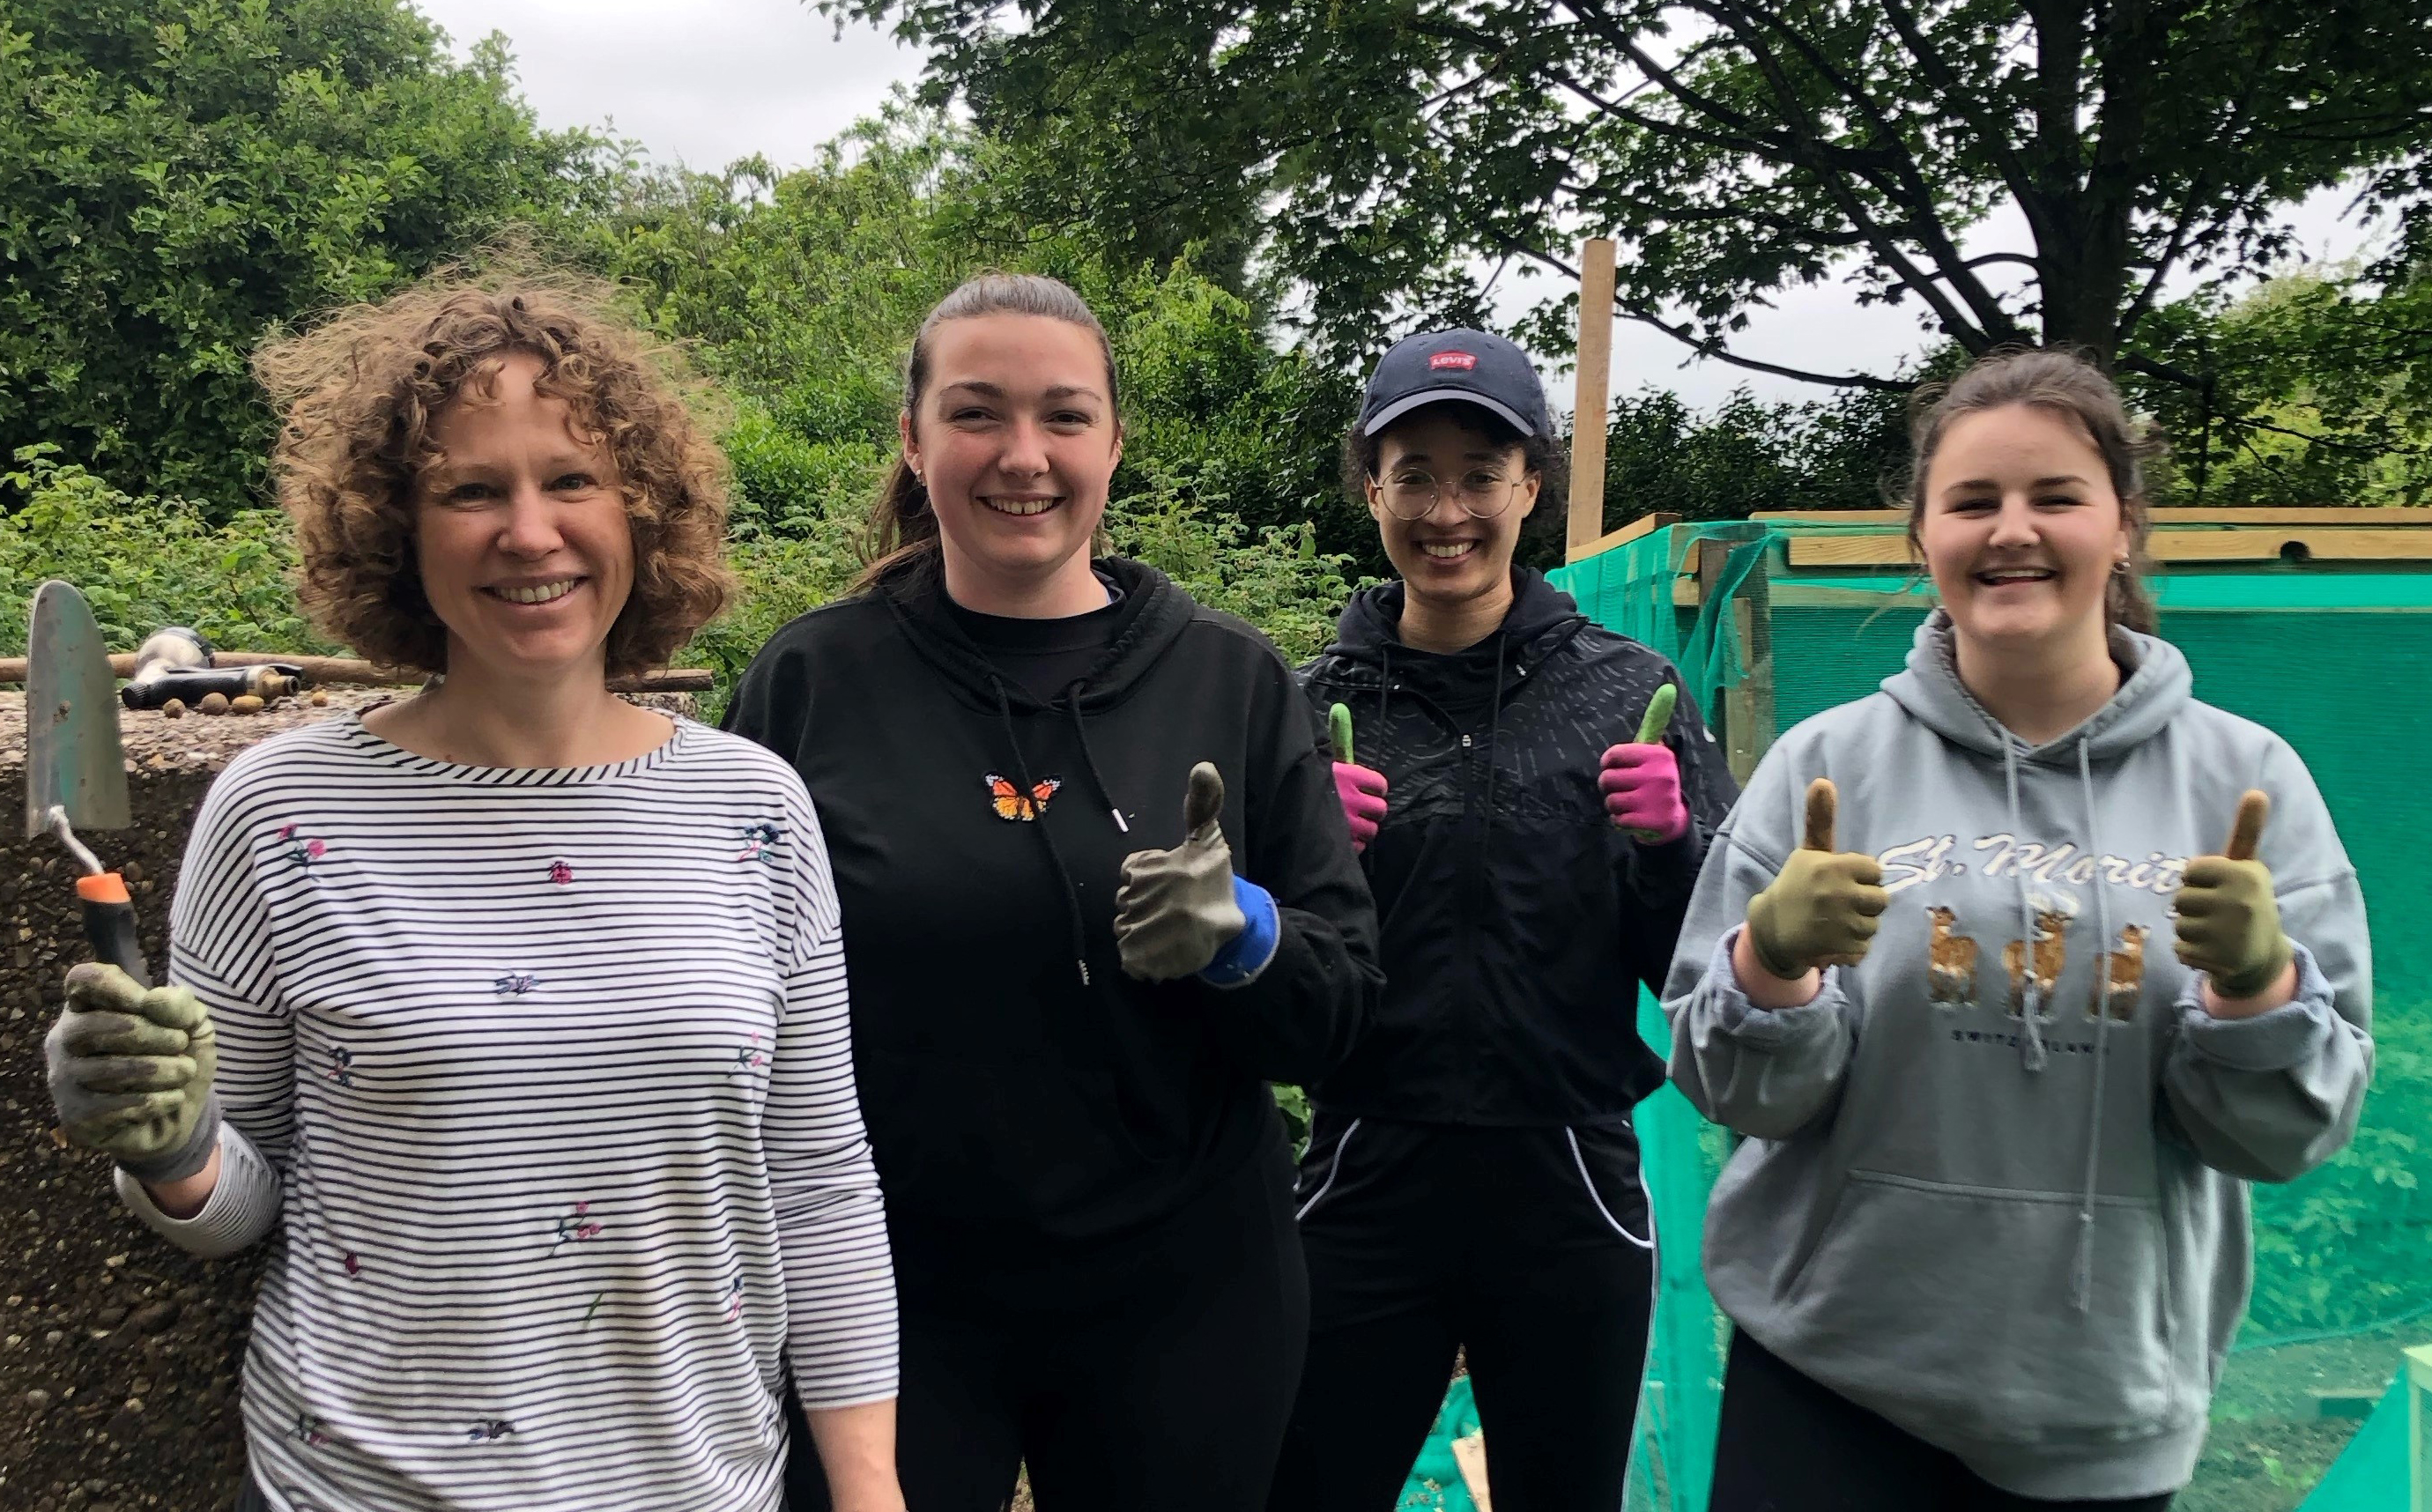 Photograph of Annie Gosnell, Sasha Gill, Tamika Gayle and Amy Black at the Trussell Trust allotment in Beeston, the UK